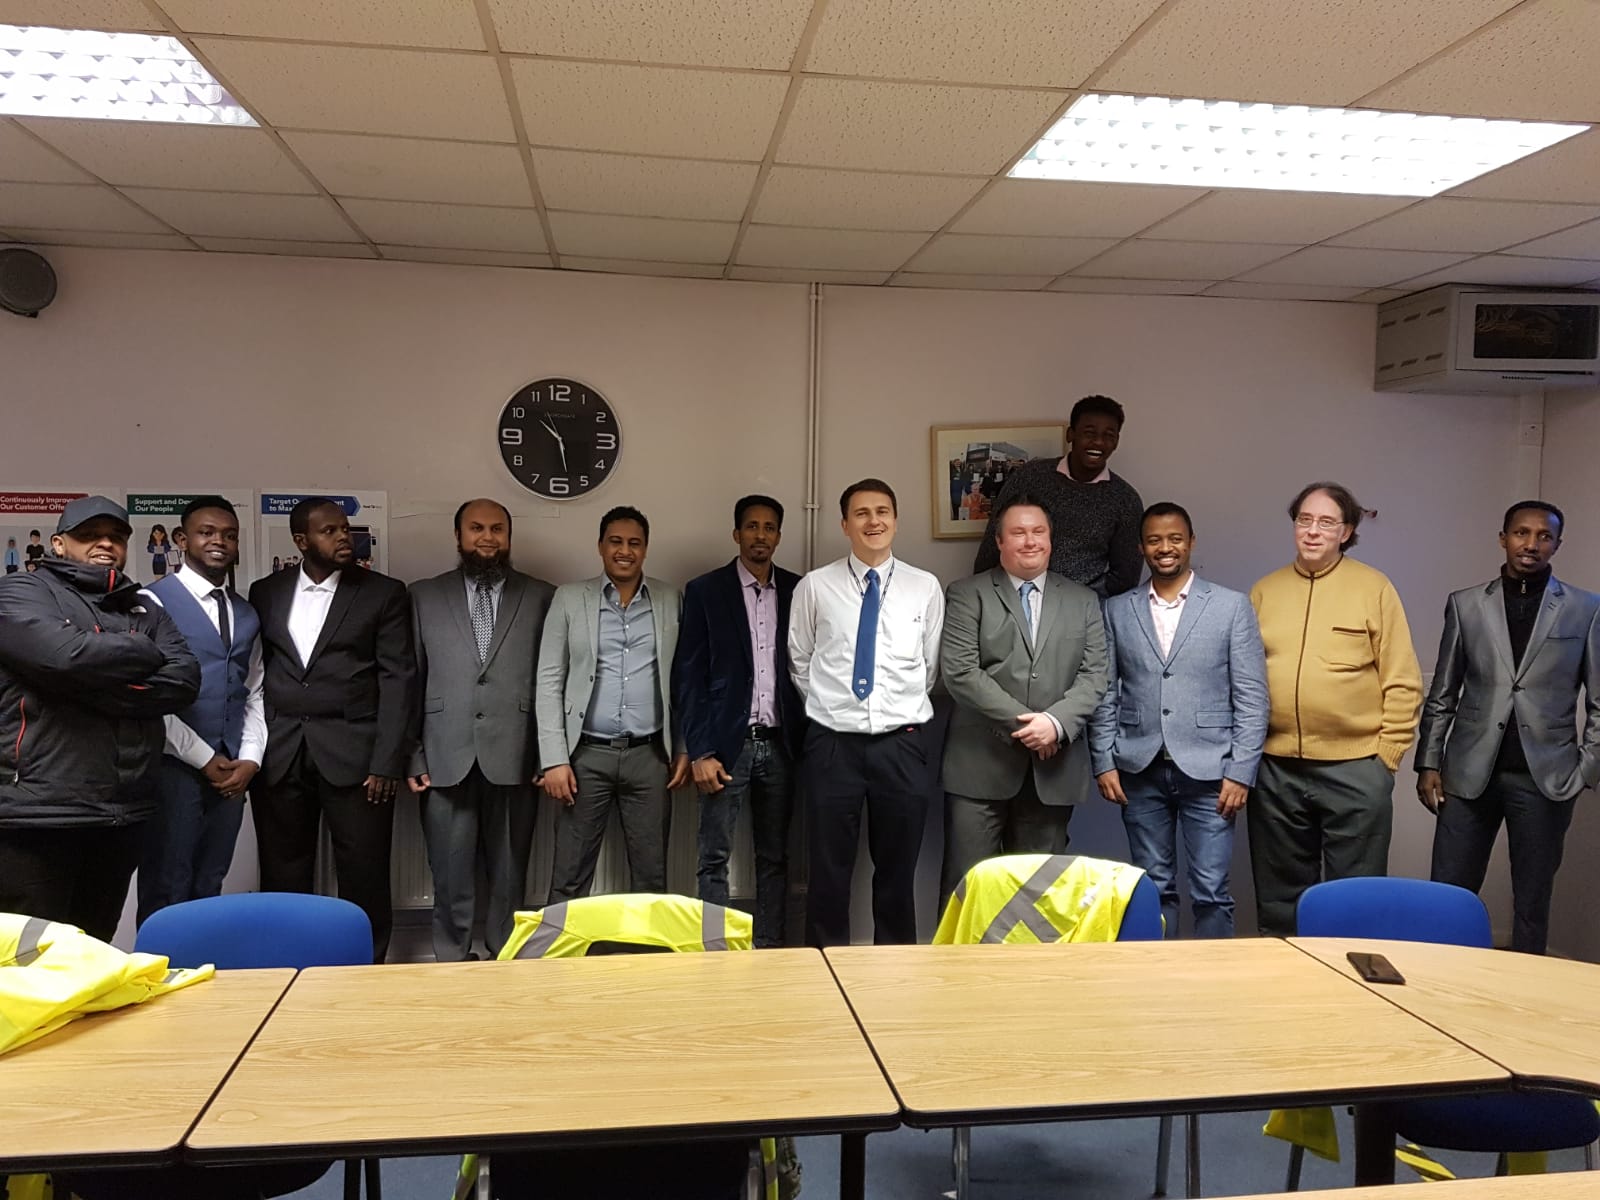 9 people gained employment as bus drivers through our refugee training programme